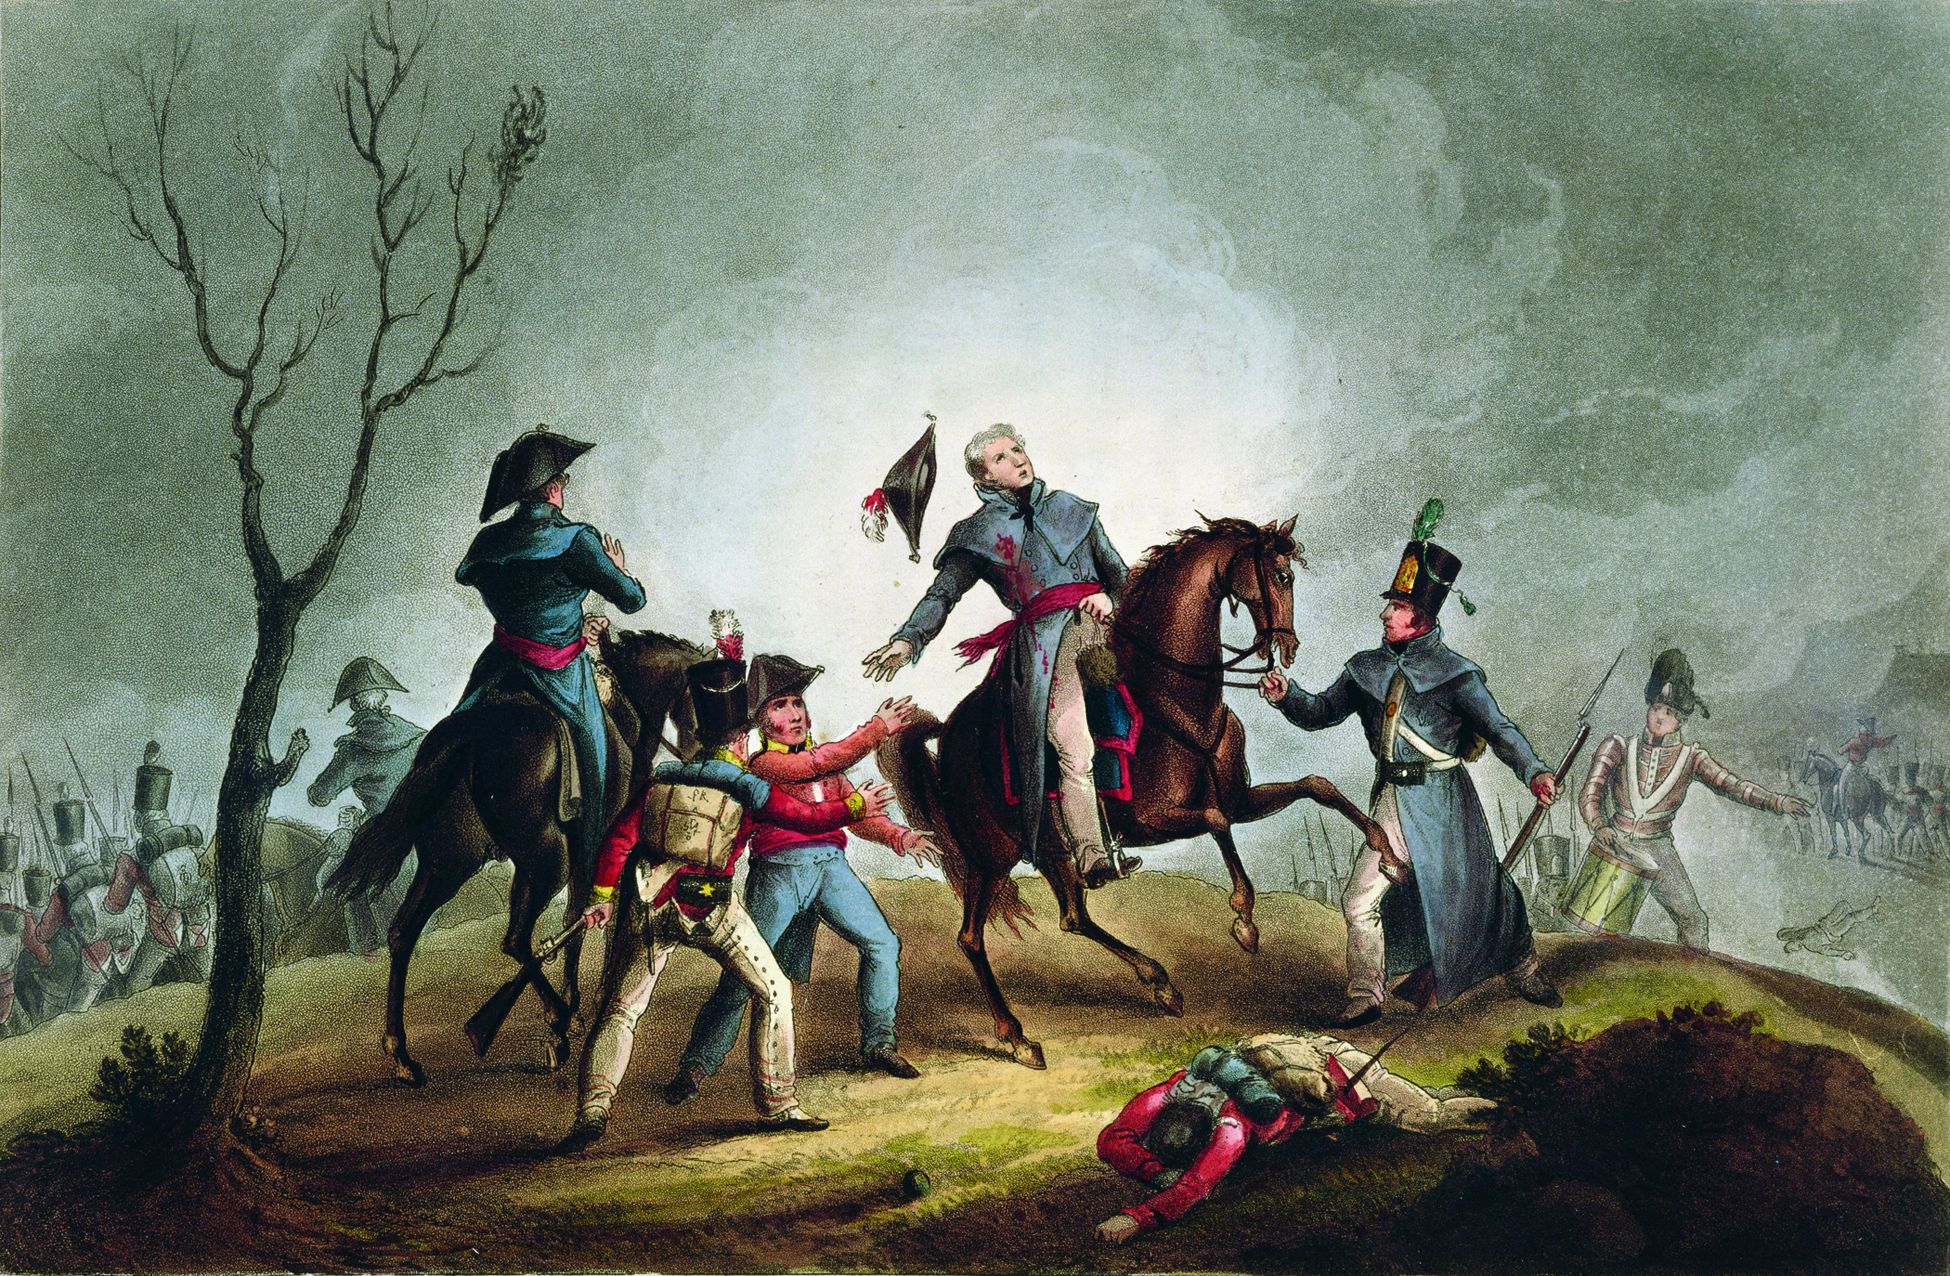 General Moore receives his fatal wound at Corunna, January 16, 1809.